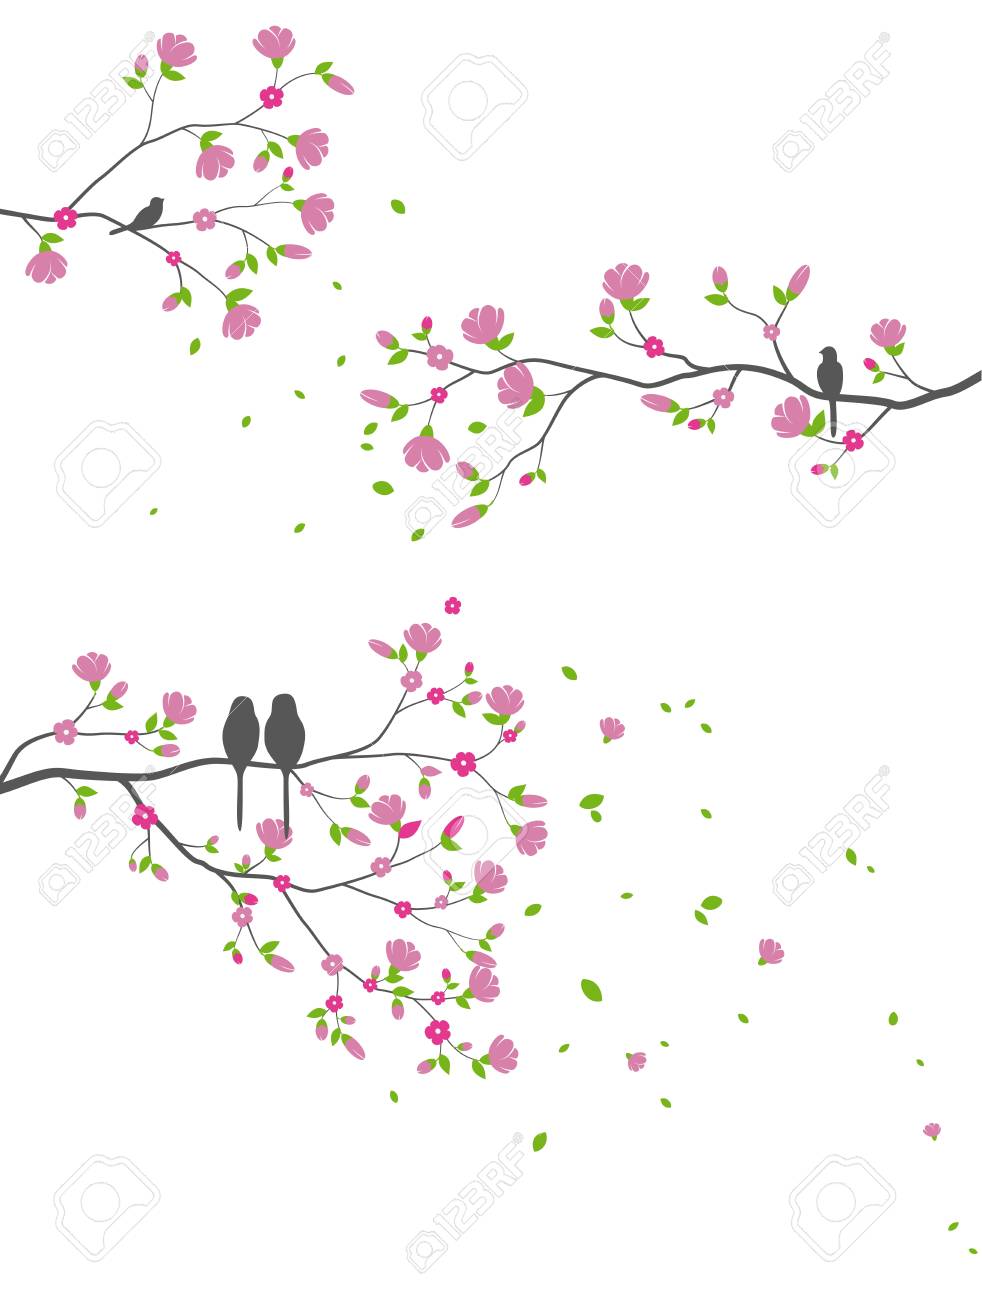 Beautiful Tree Branch With Birds And Flower Silhouette Background